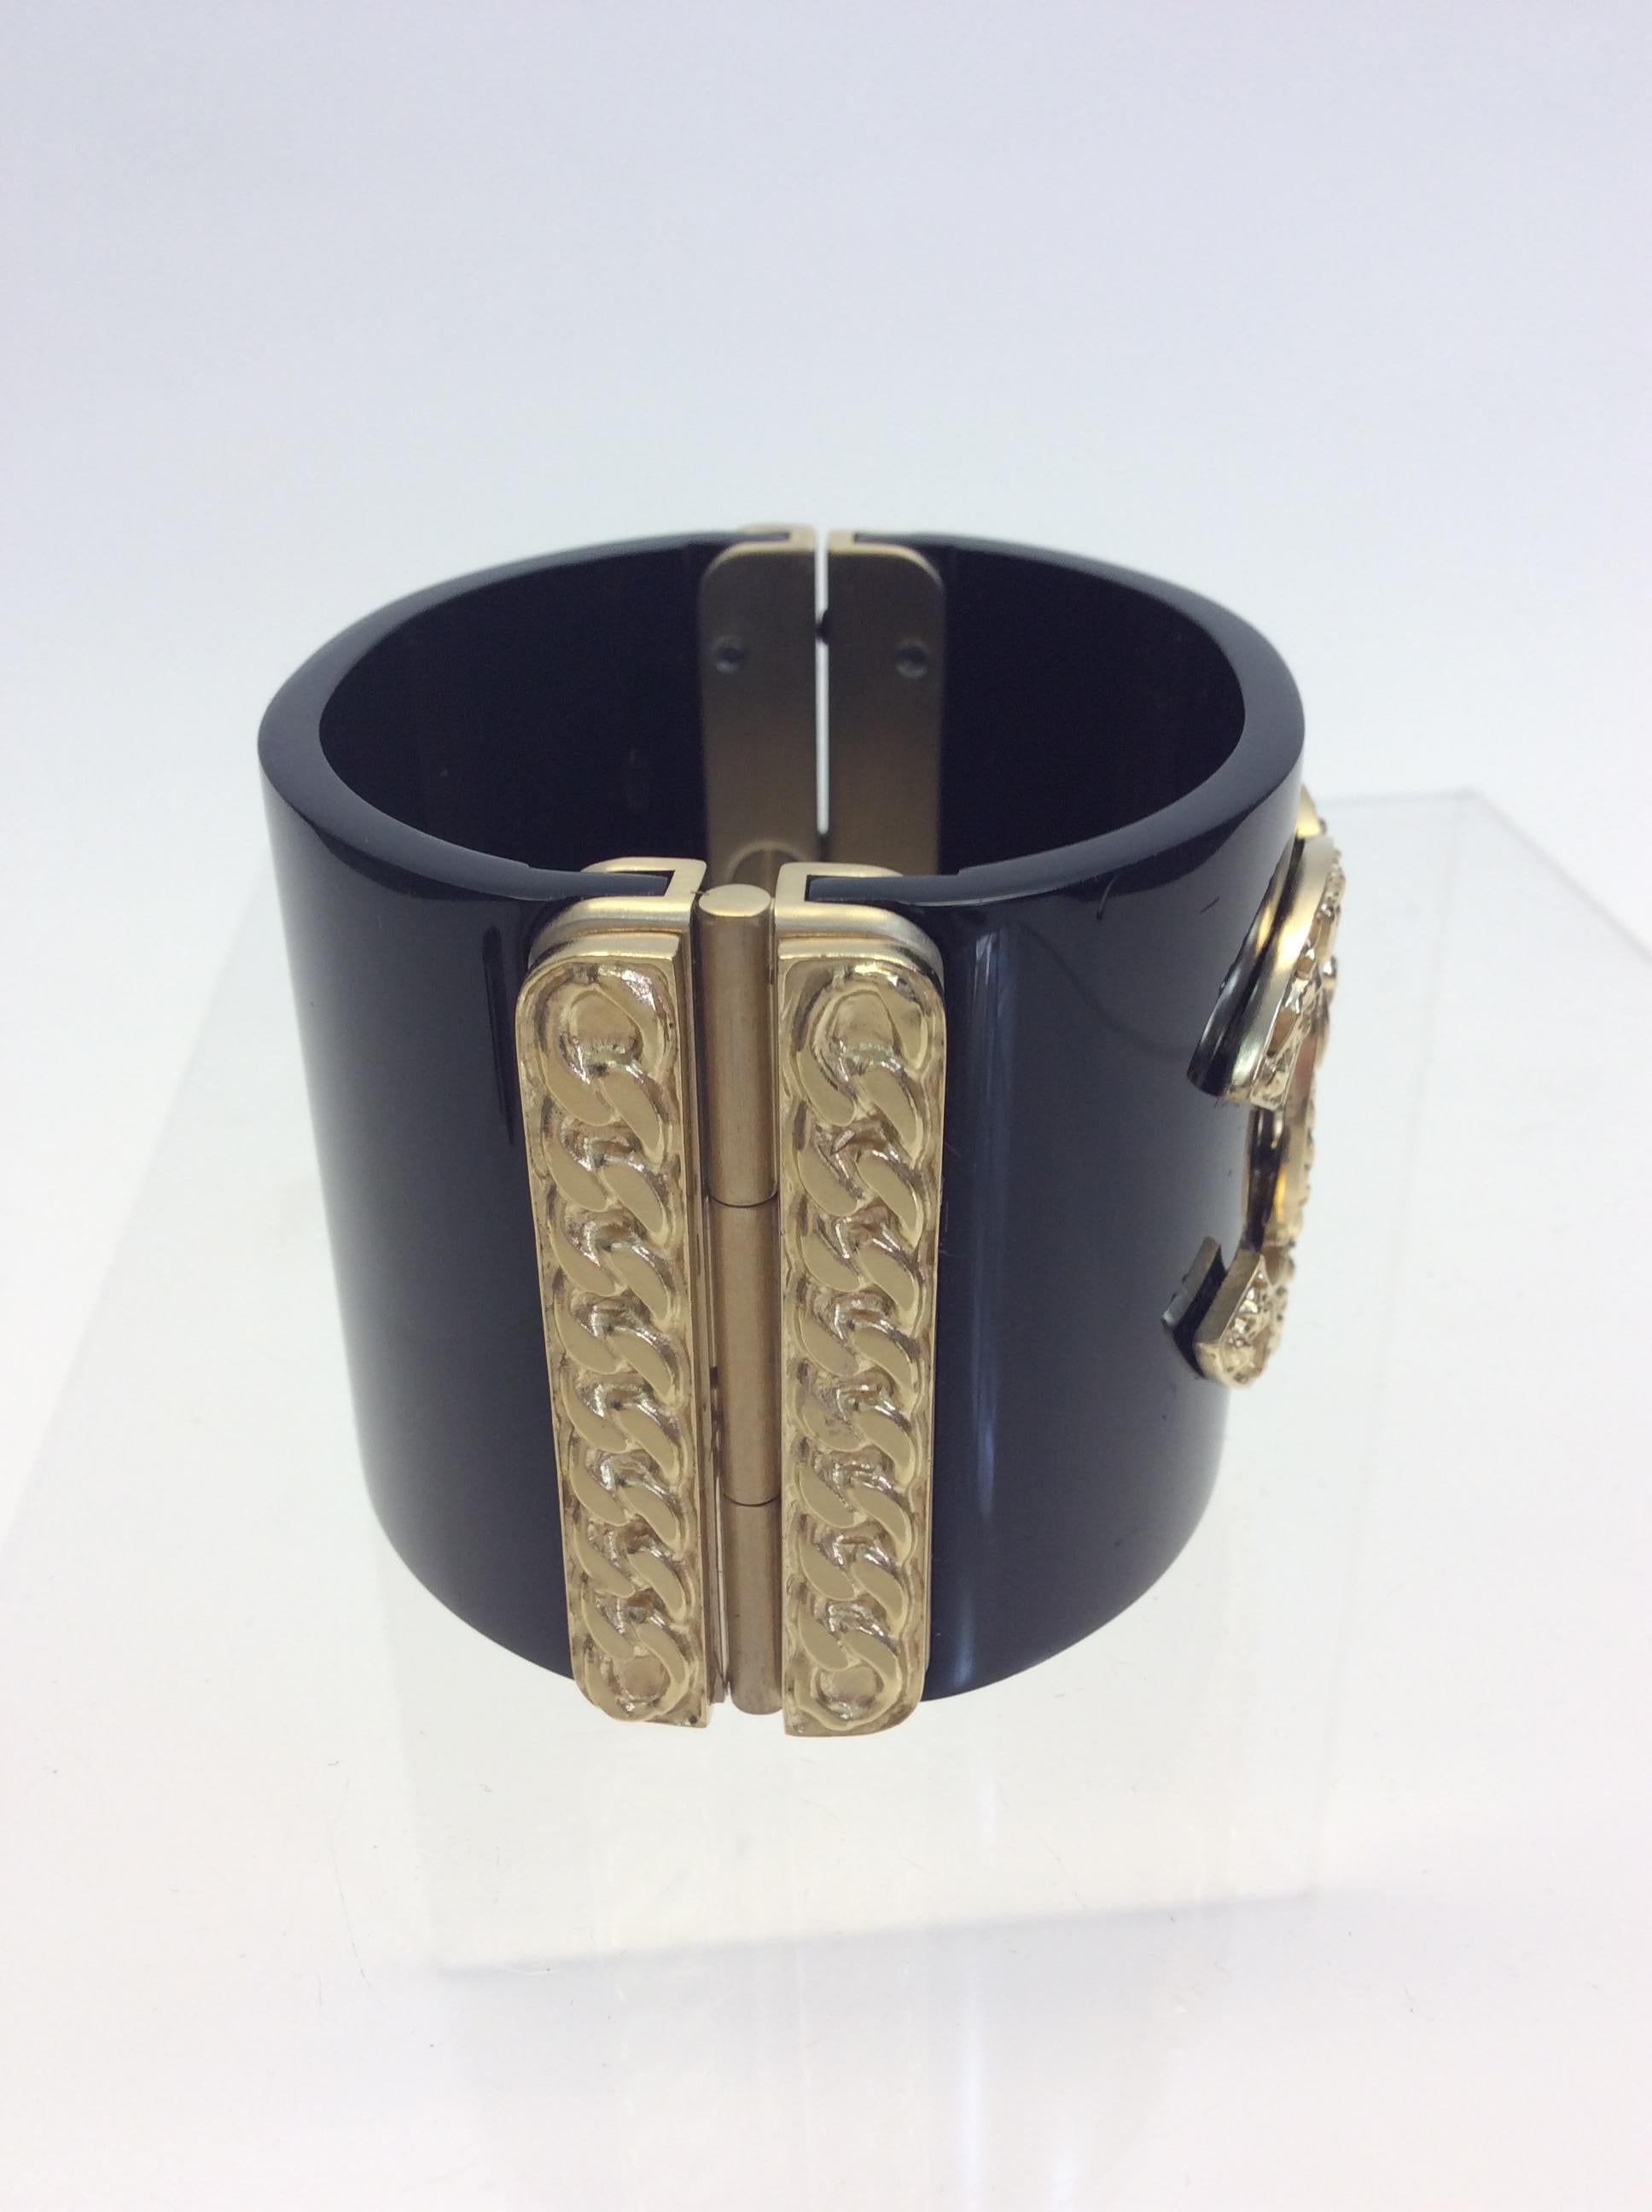 Chanel Black and Gold Lucite Cuff In Good Condition For Sale In Narberth, PA